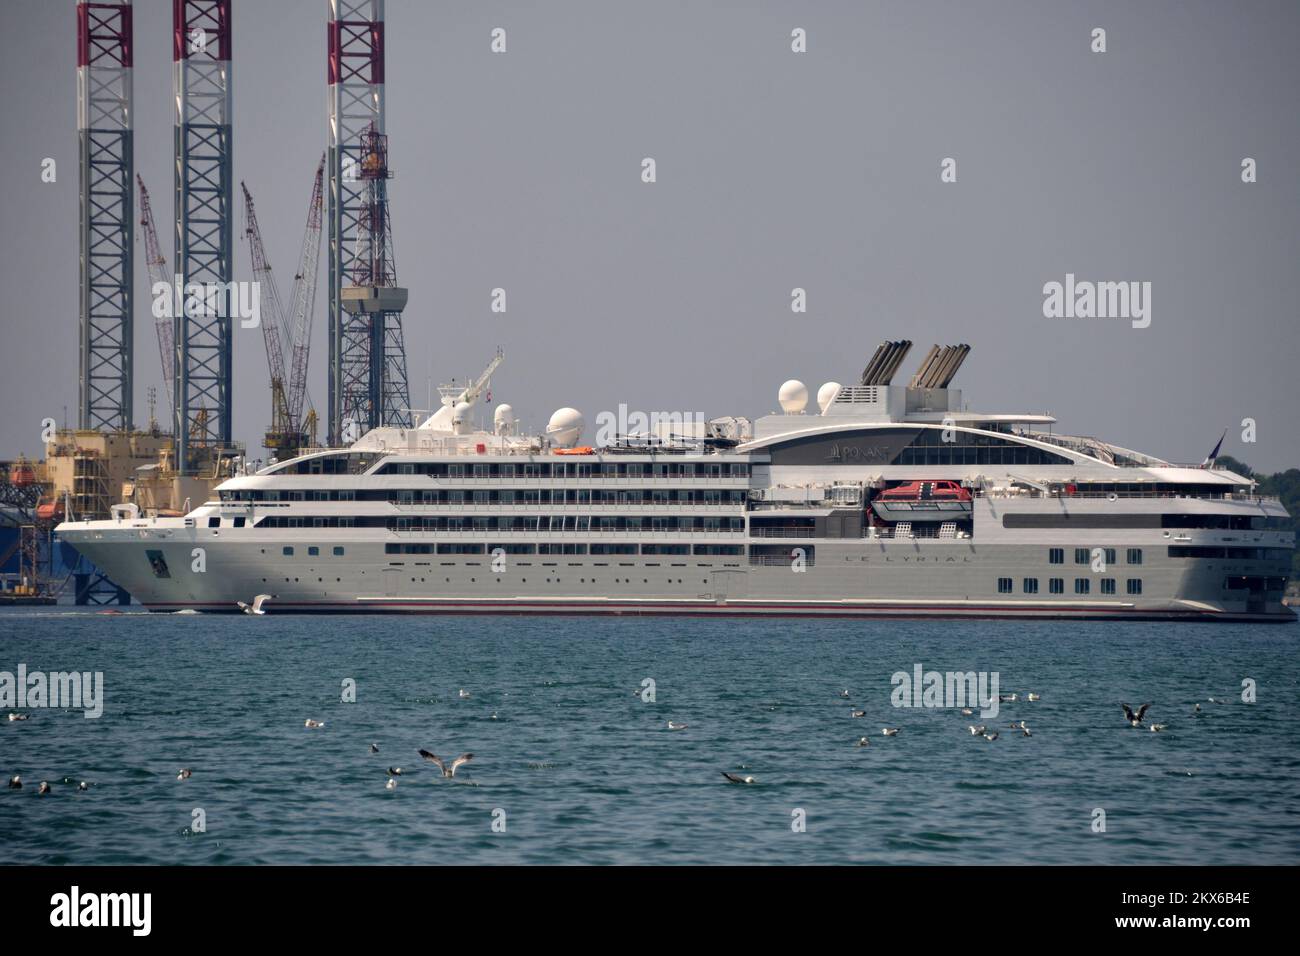 30.05.2018., Pula- Cruiser Le Lyrial, 142 meters long, built in the Italian shipyard Fincantieri in Ancona, drove this morning came on few hours in Pula This luxury boat, has 122 cabins with private balconies, receiving 264 passengers, of which nearly 150 crew members are cared for. Photo: Dusko Marusic/Pixsell  Stock Photo